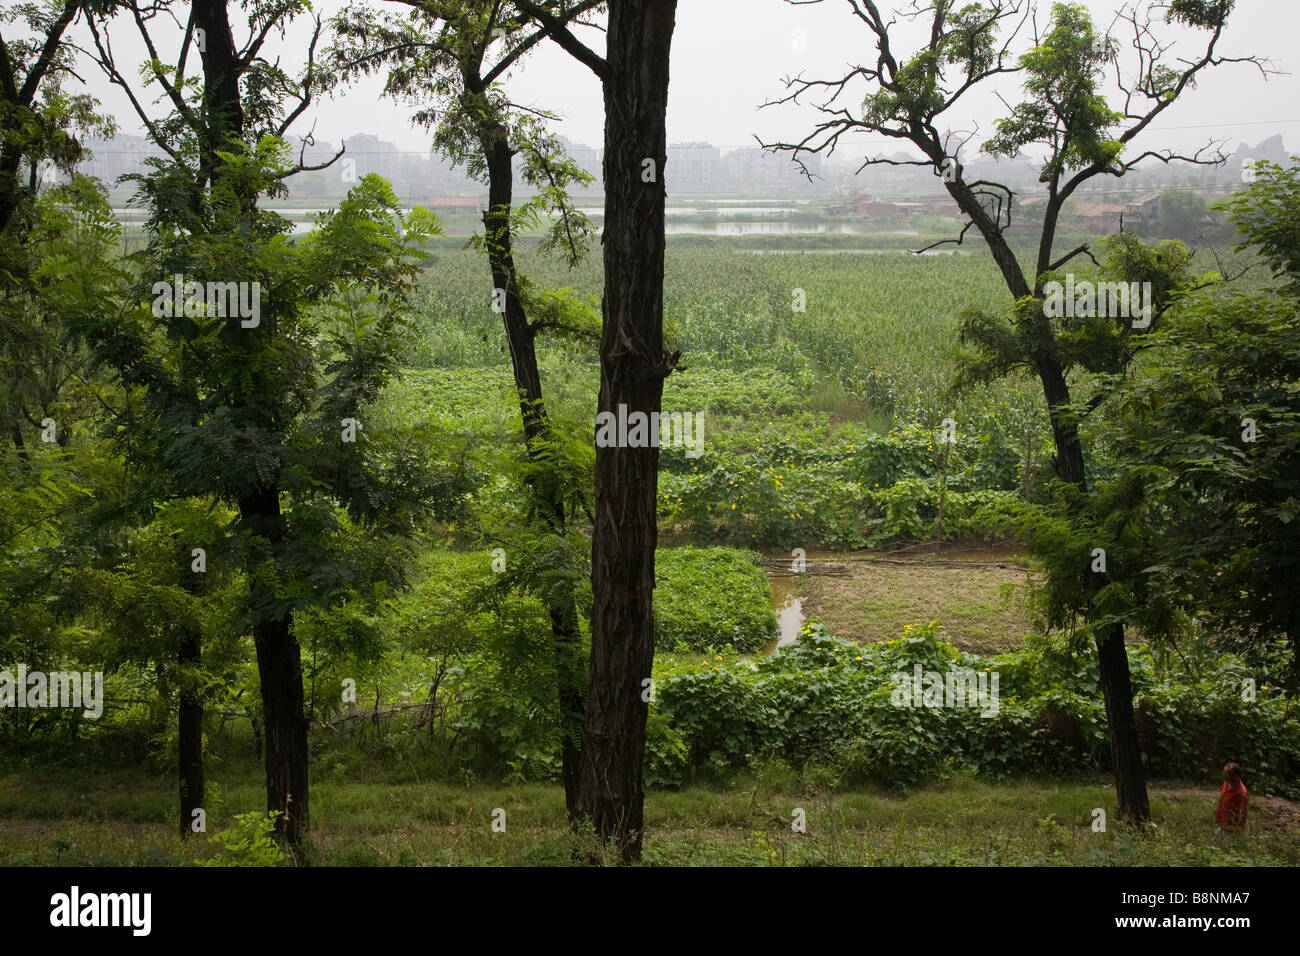 Agricultural landscape by the city walls of Kaifeng, ancient imperial capital of China, Henan Province Stock Photo